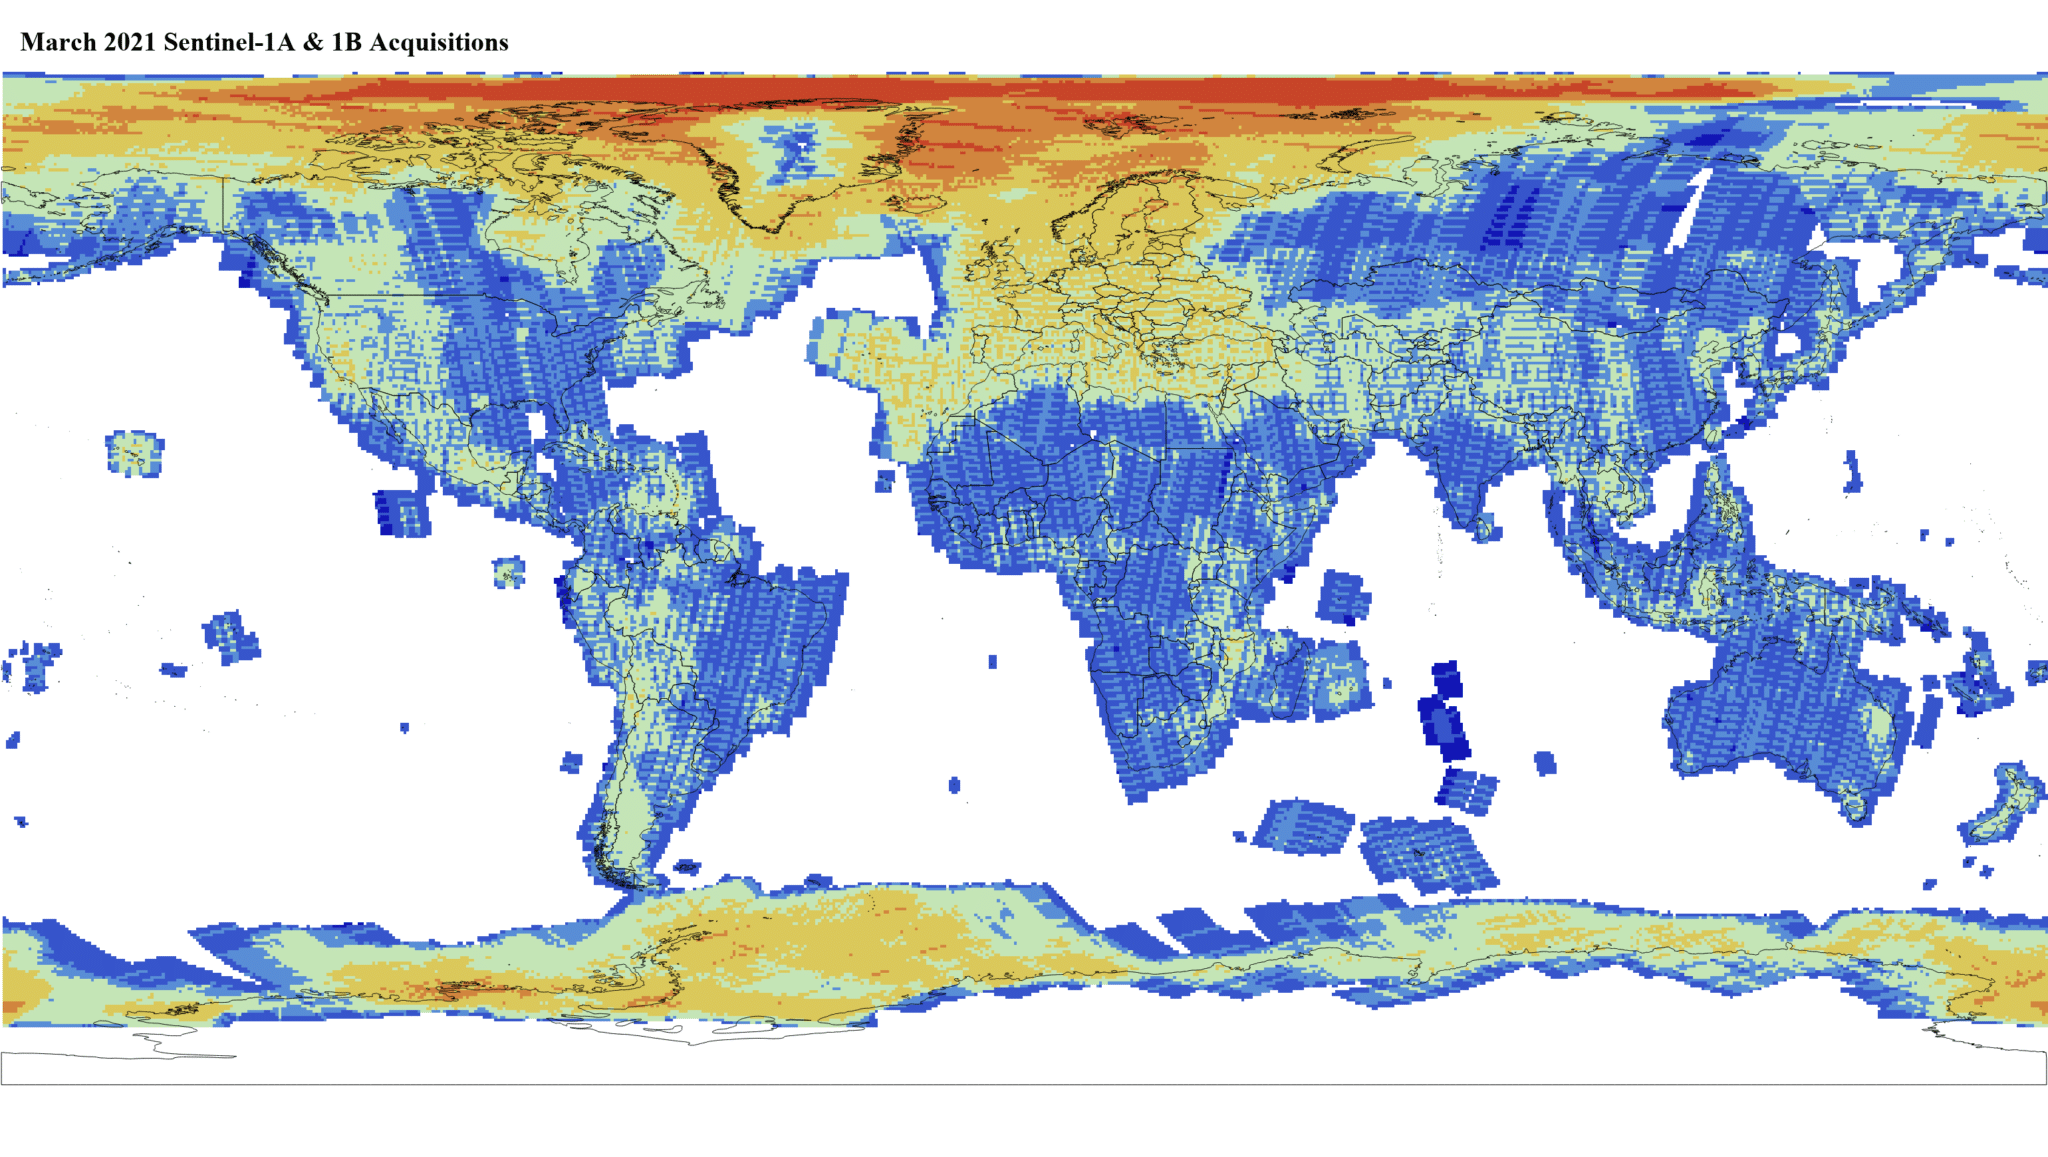 Heat map of Sentinel-1A and -1B GRD global acquisitions March 2021